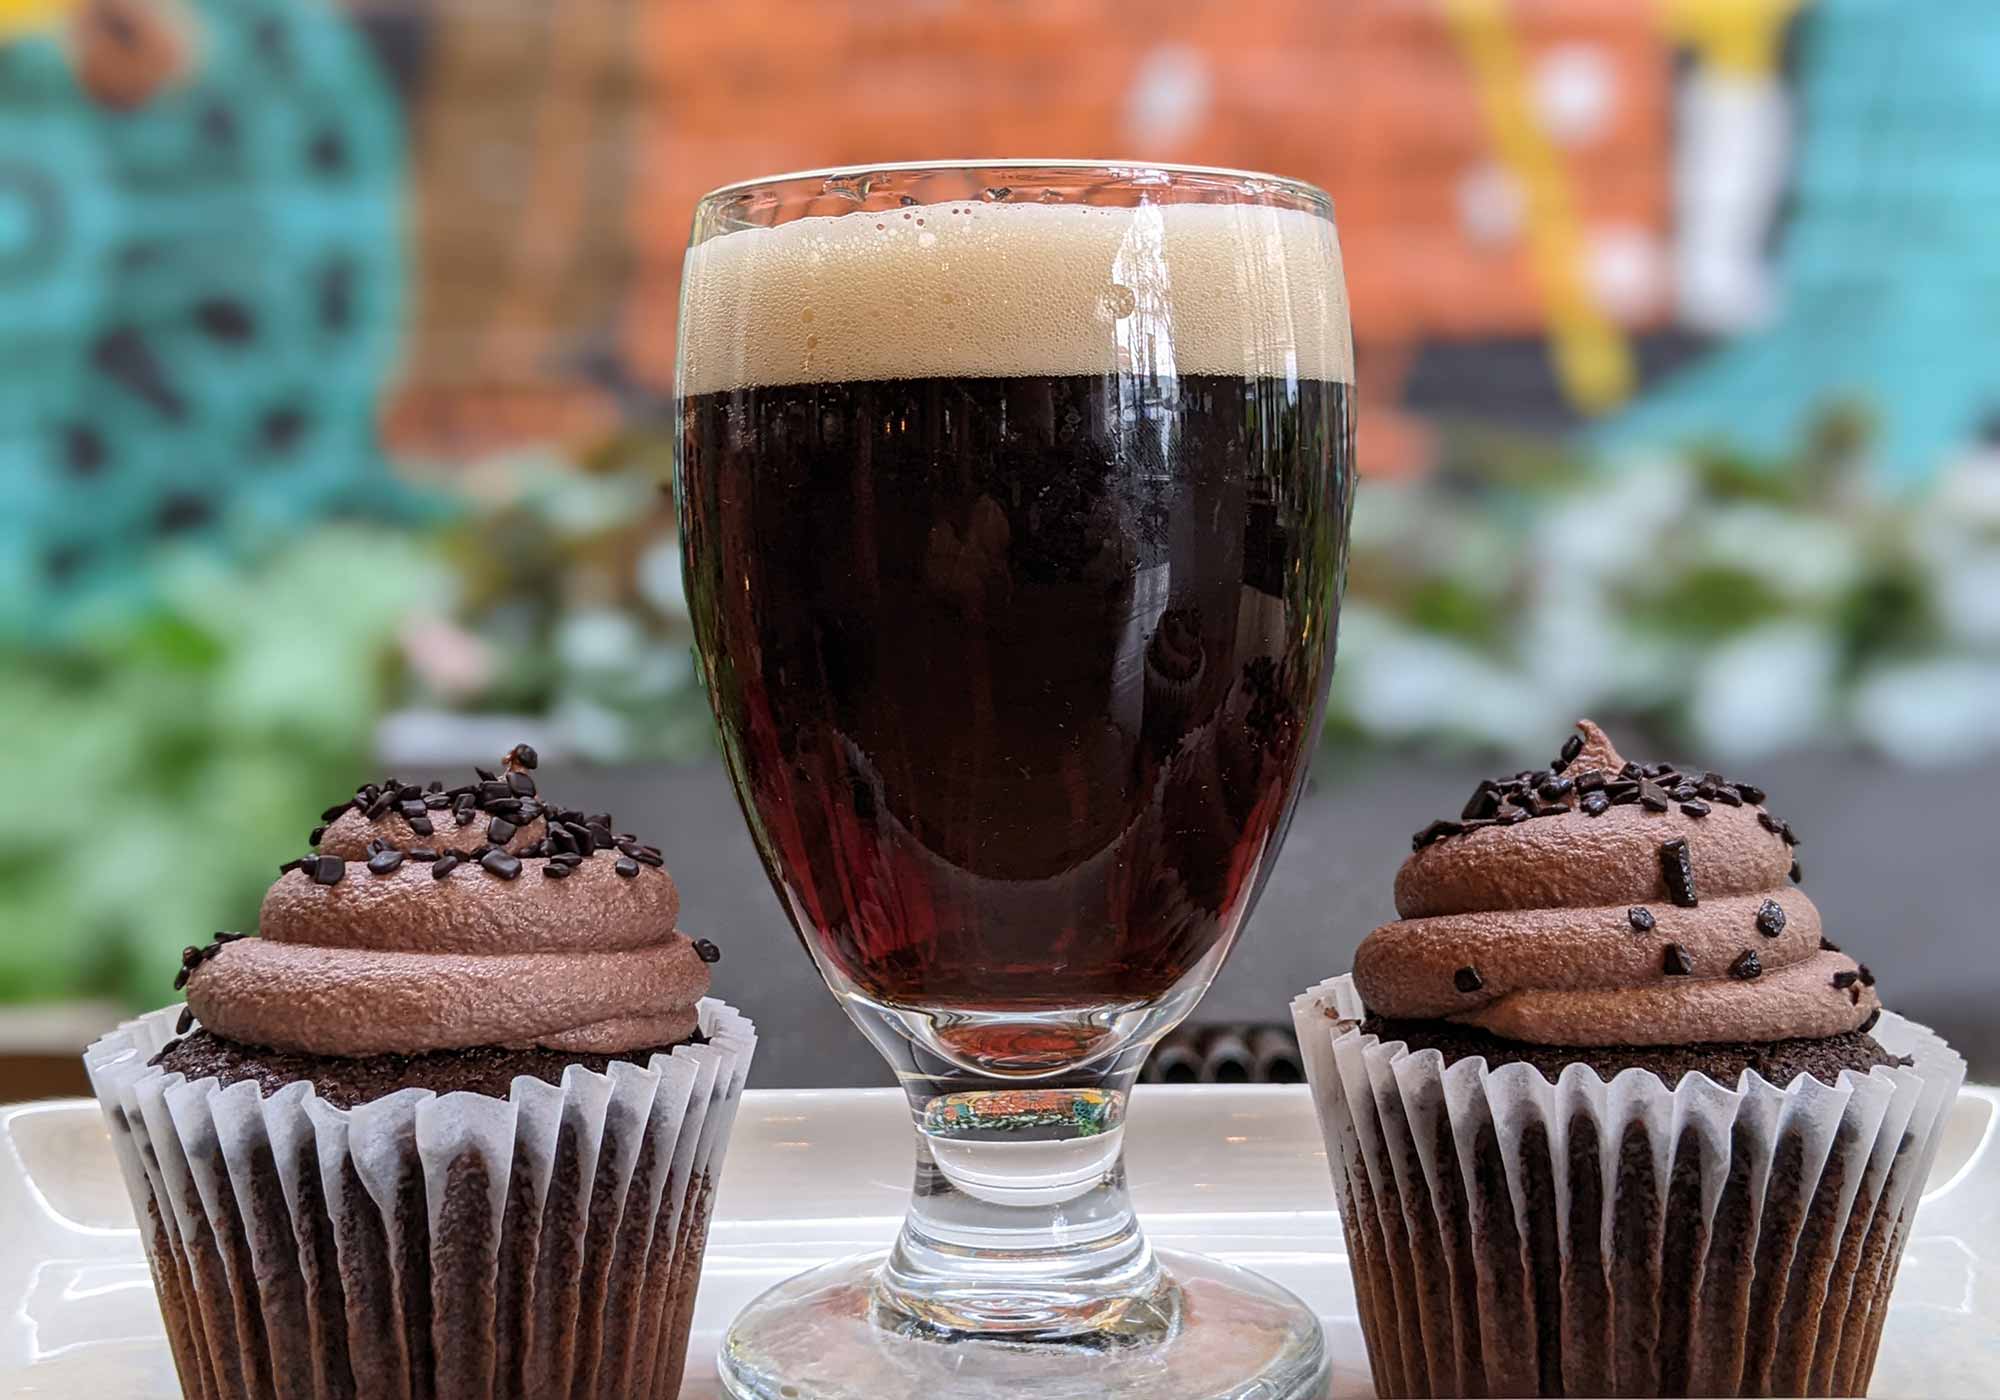 How to Pair Beer and Desserts, According to an Expert